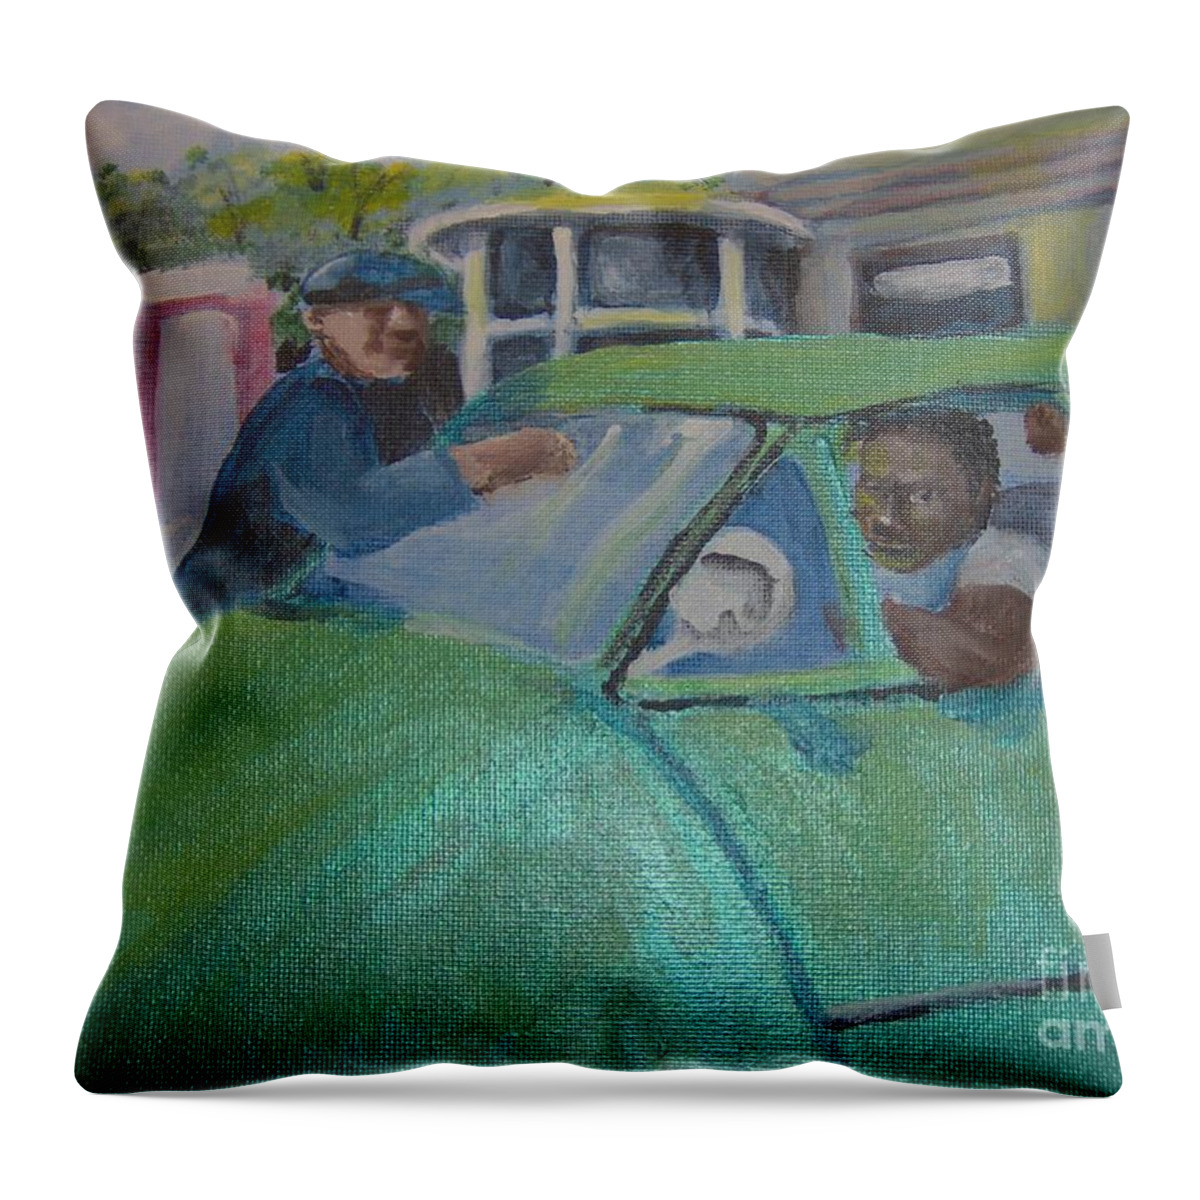 Gas Station Throw Pillow featuring the painting Gas Station by Saundra Johnson